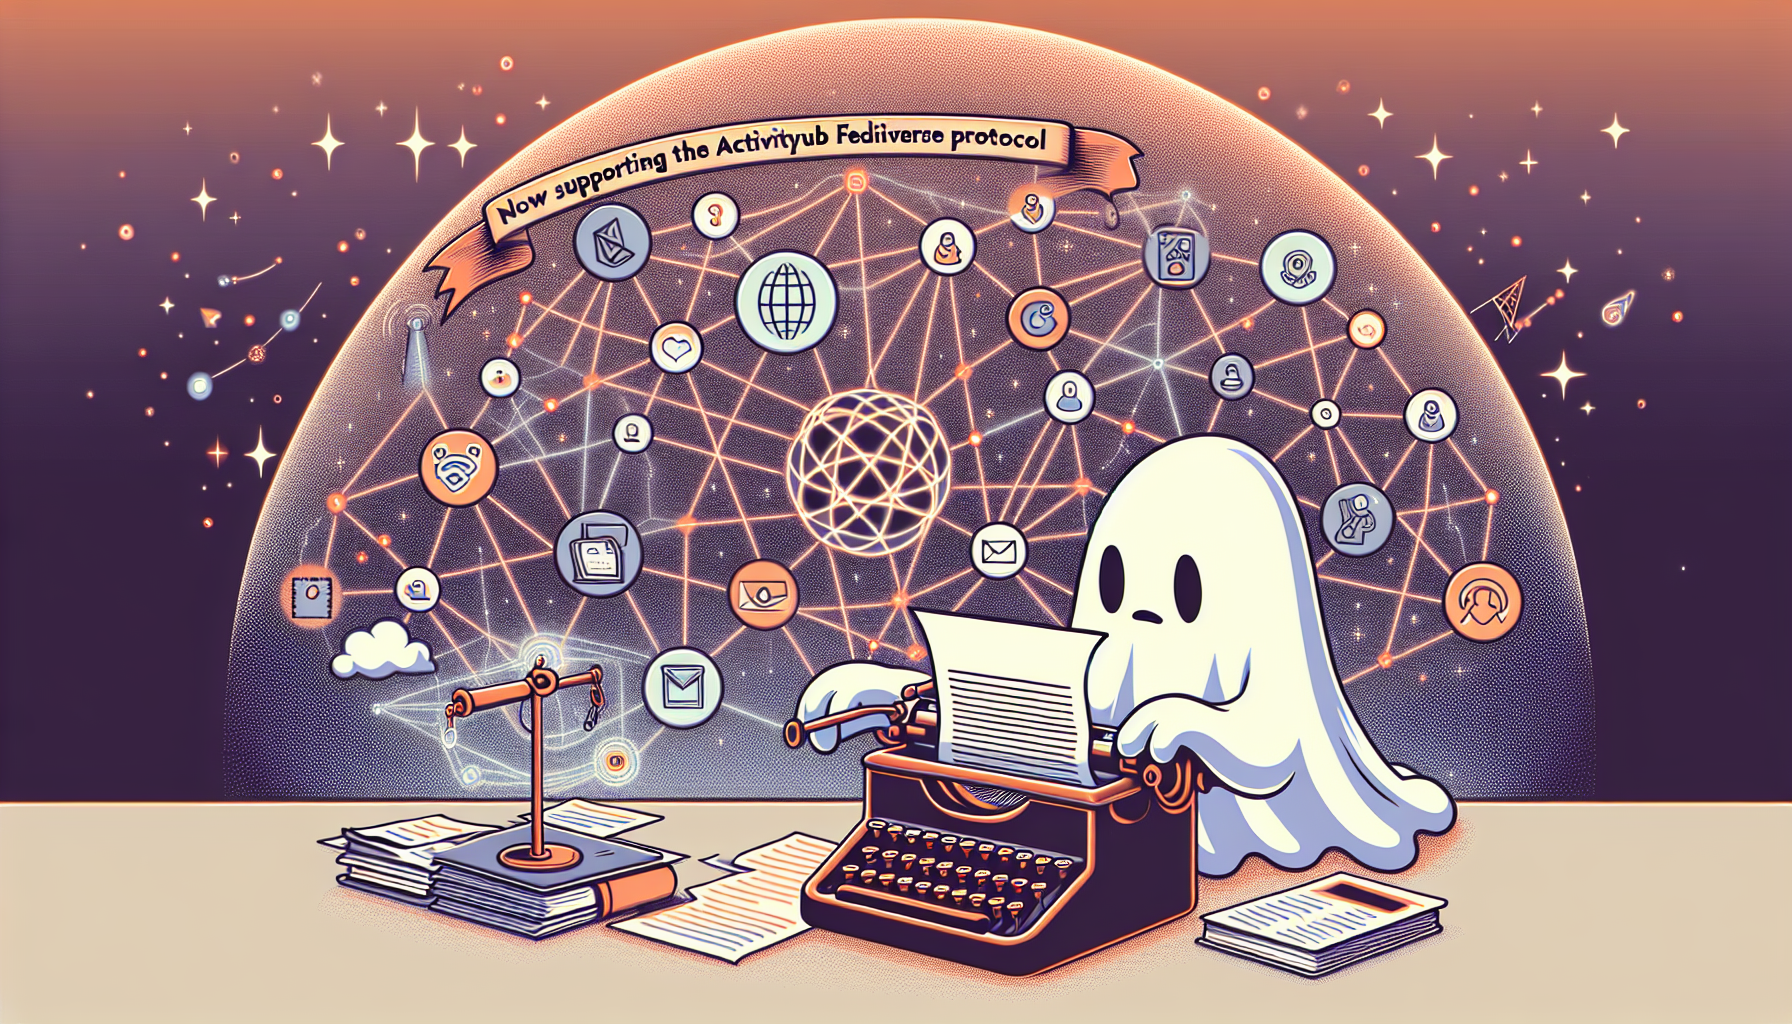 Ghost Newsletter Service will now support the ActivityPub Fediverse Protocol.